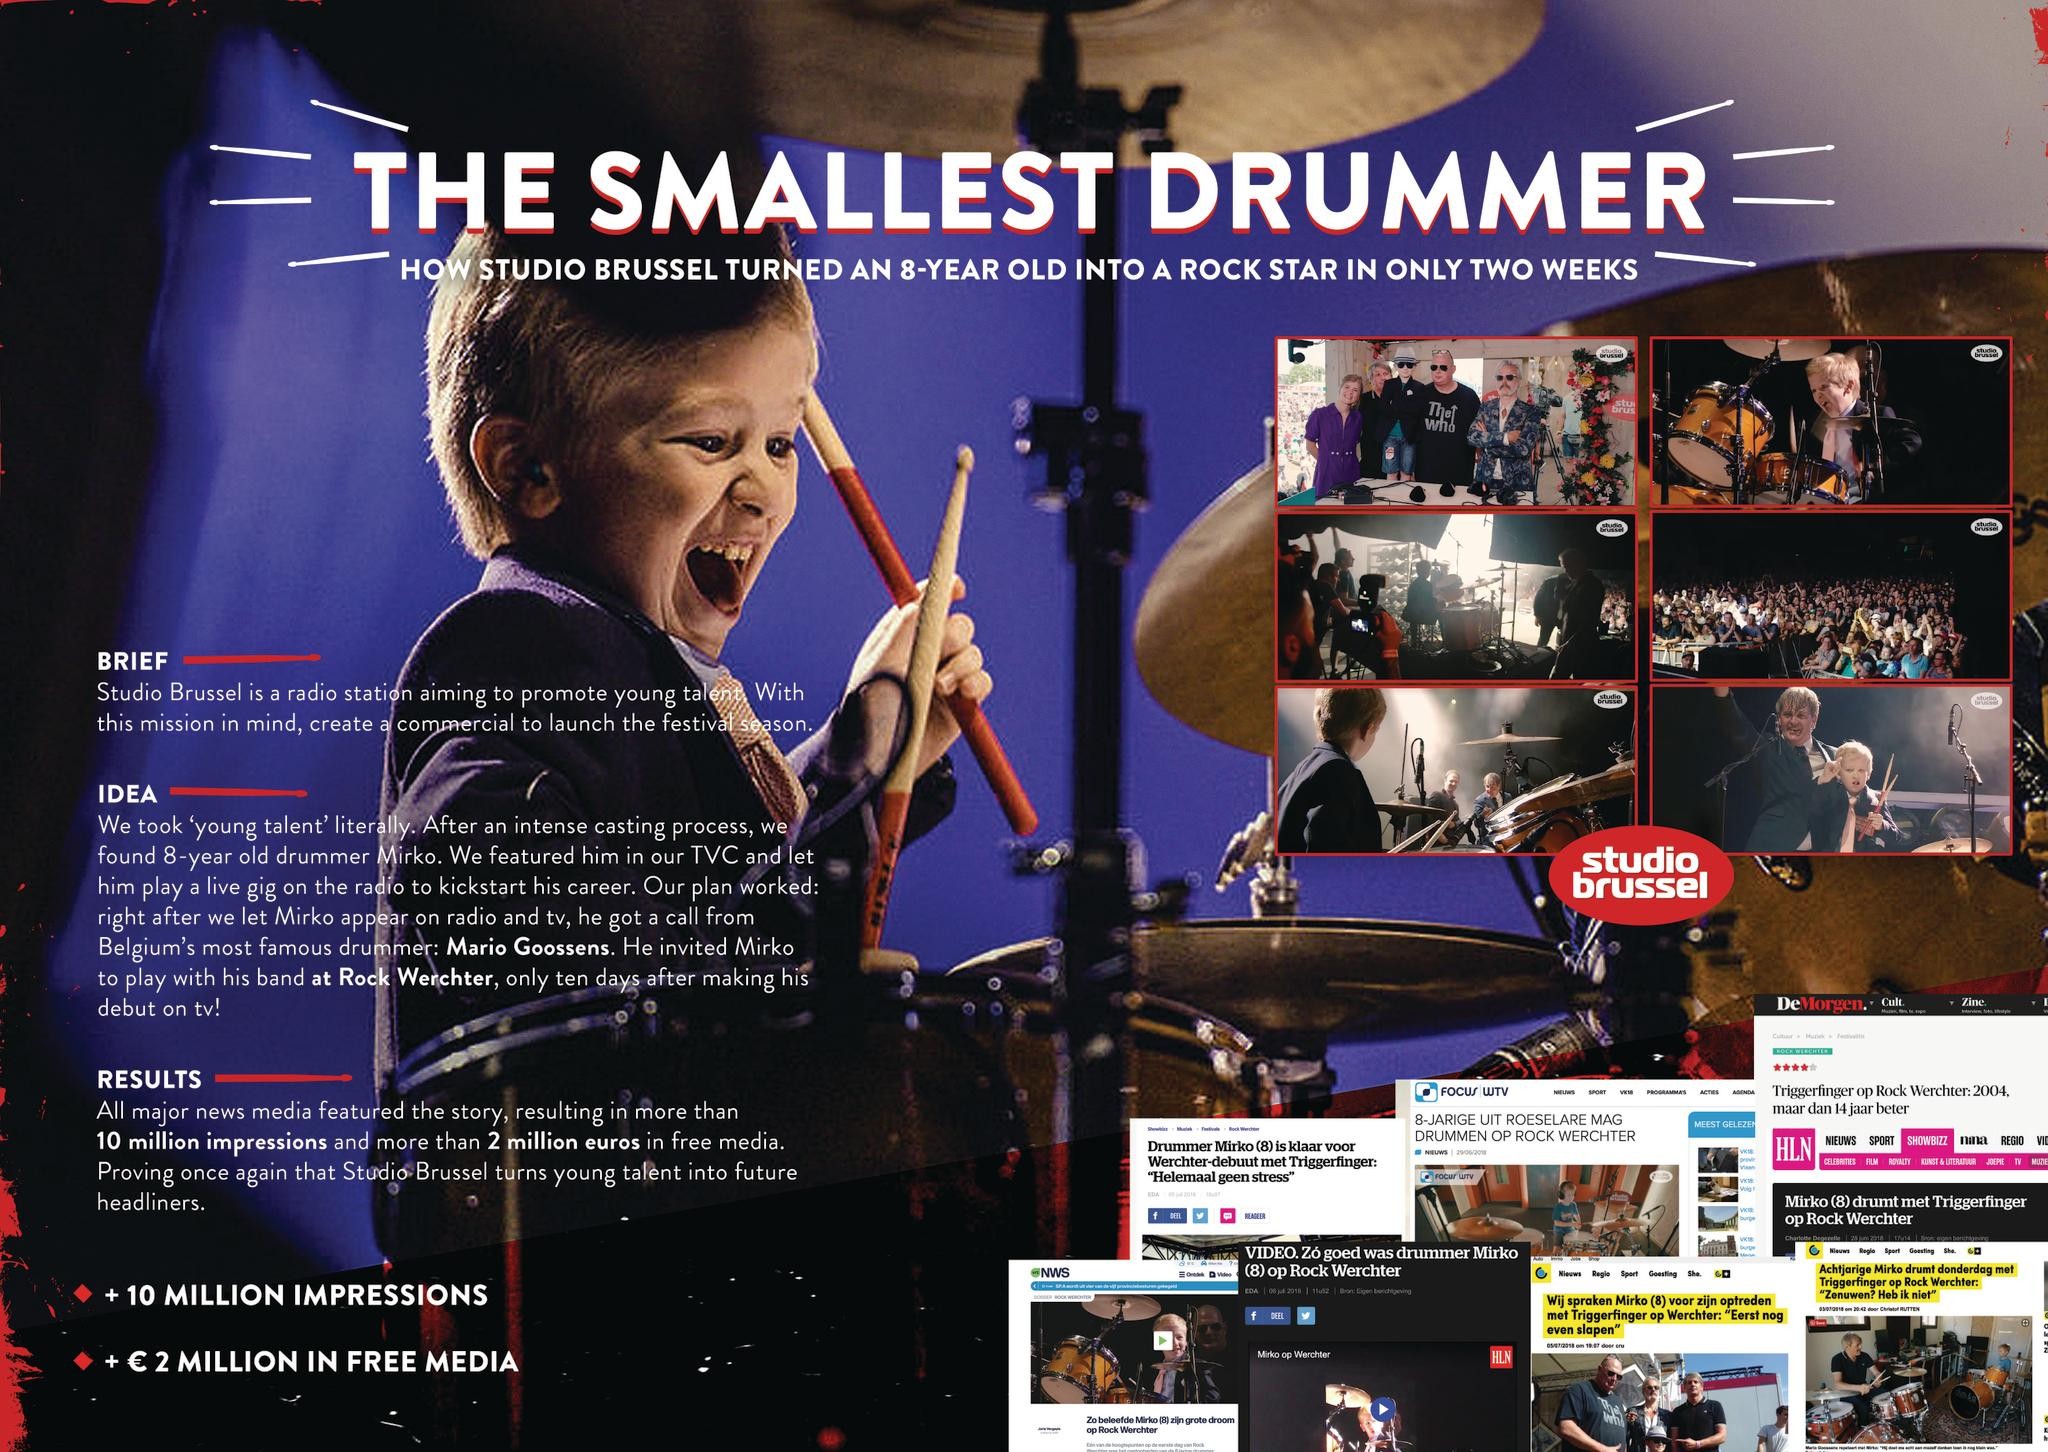 The Smallest Drummer